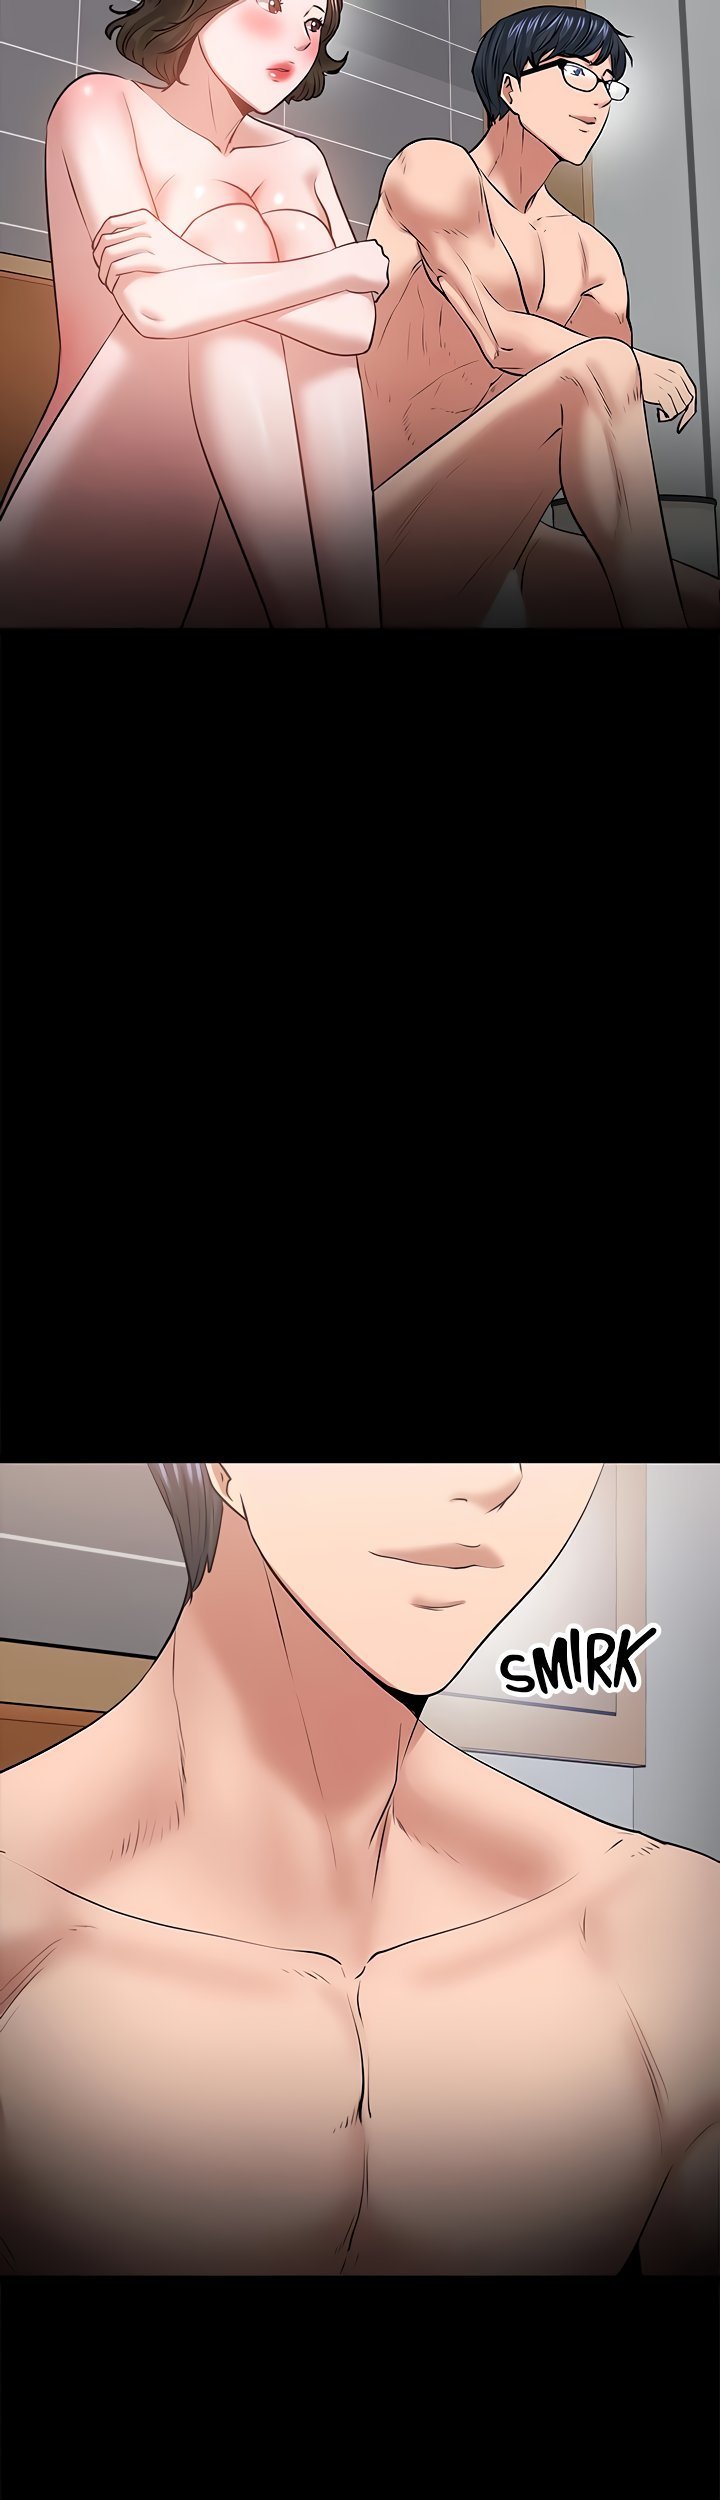 are-you-just-going-to-watch-chap-37-55